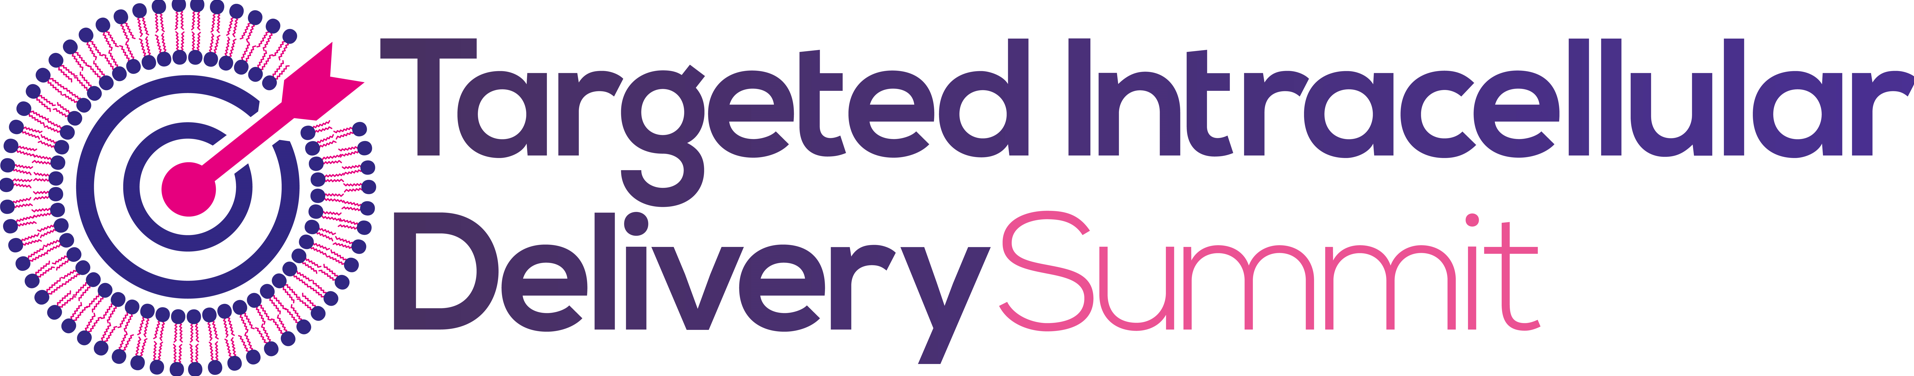 2nd Targeted Intracellular Delivery Summit